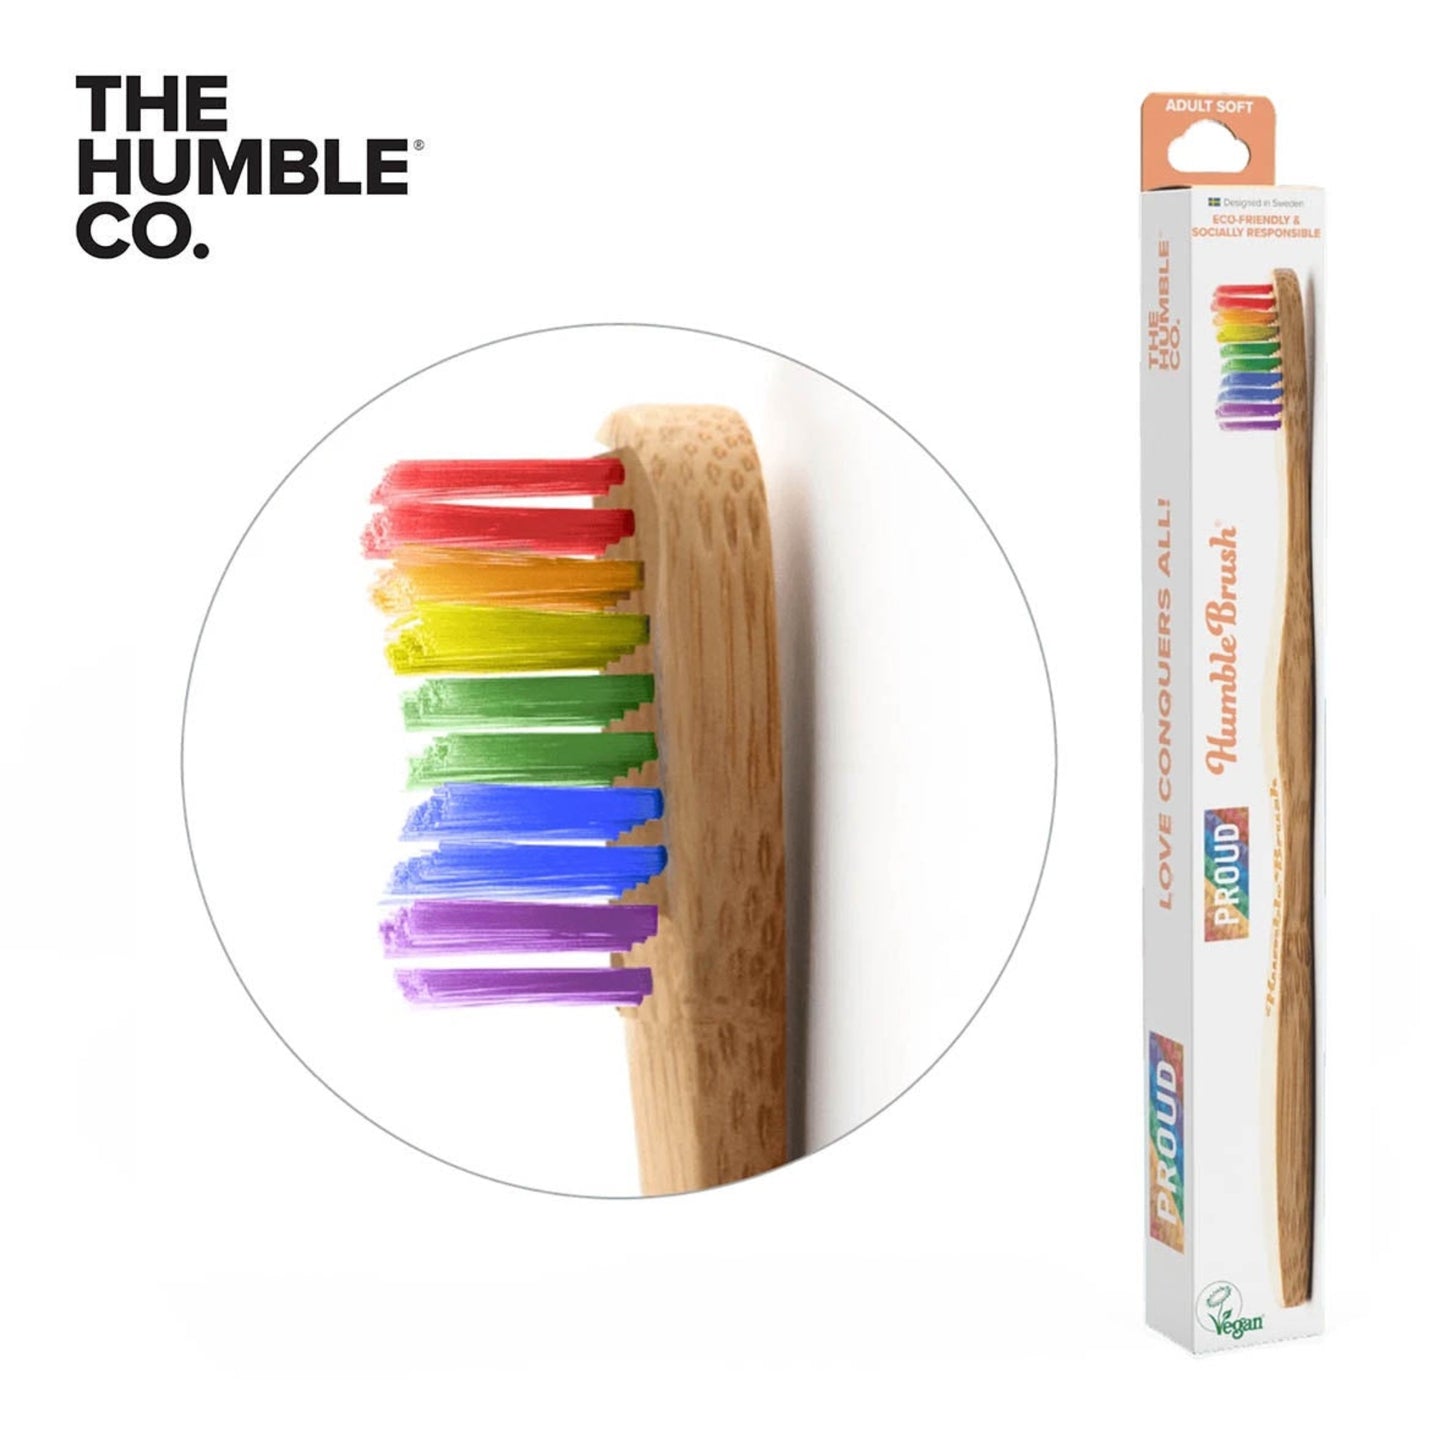 THE HUMBLE CO. Bamboo Toothbrush Adults, Soft, PROUD Limited Edition (4620411535425)